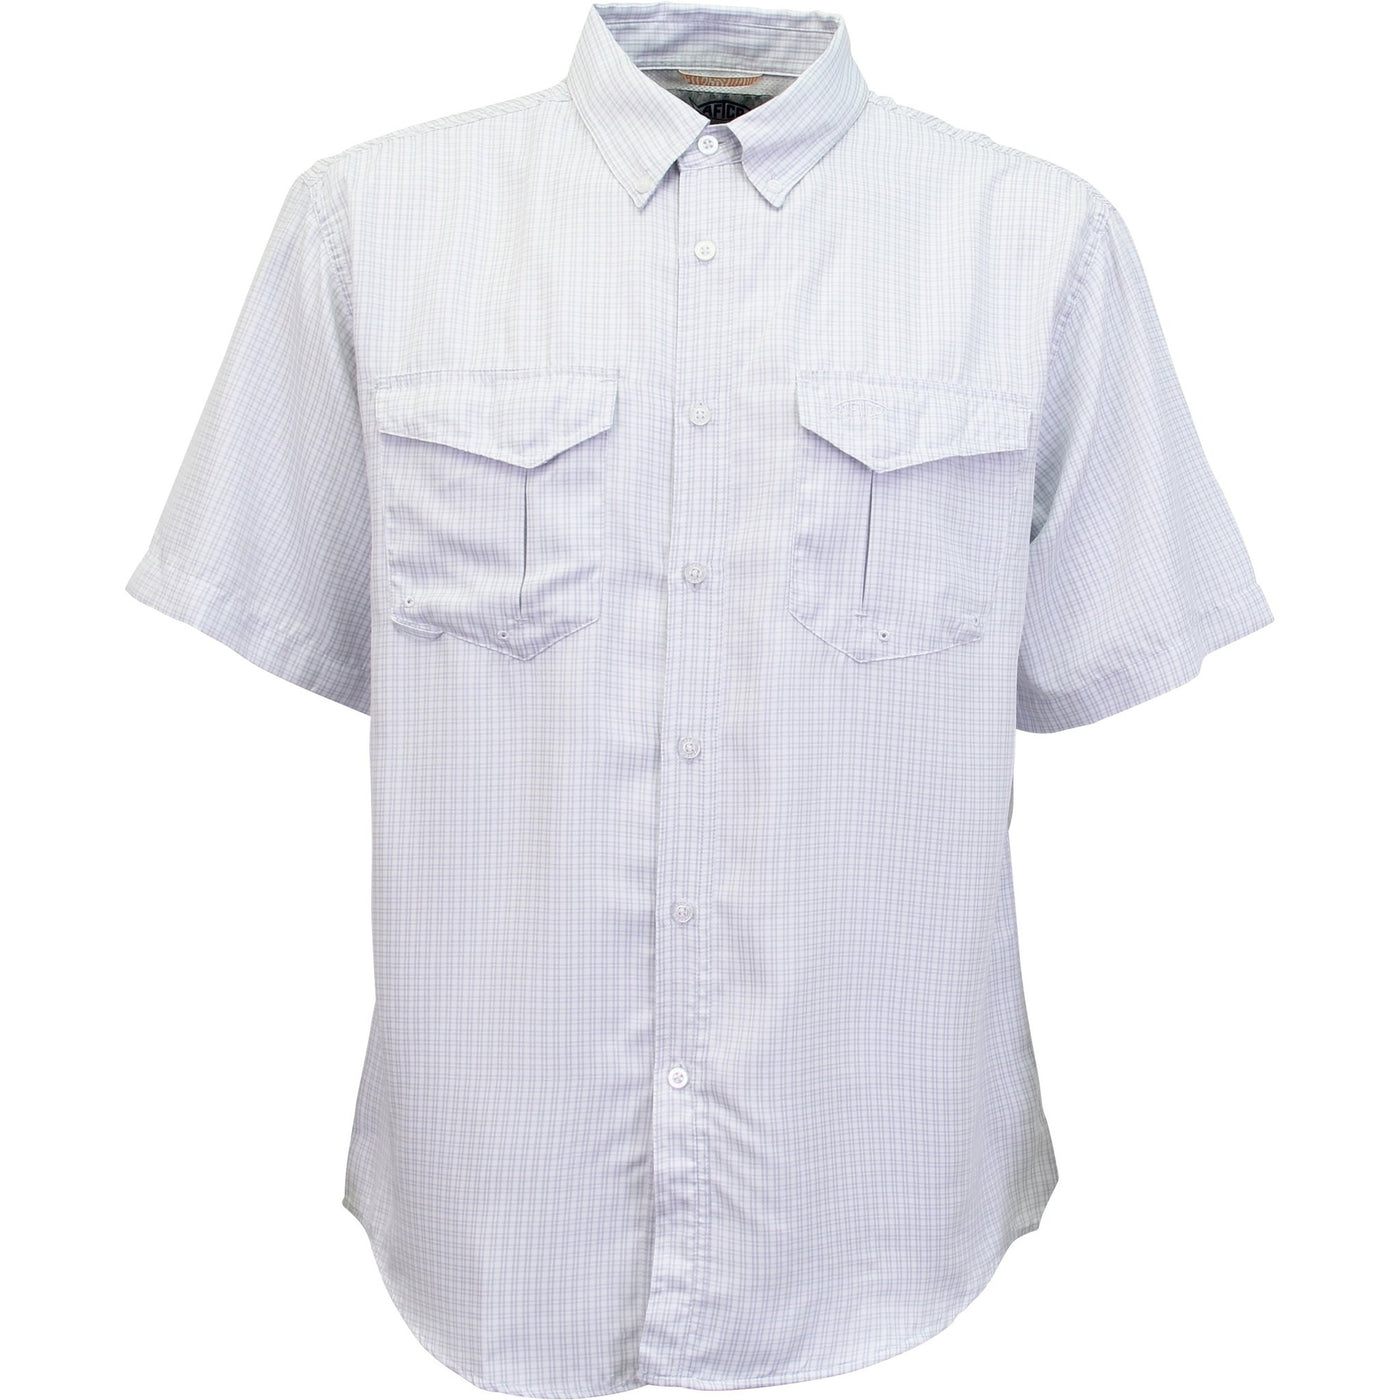 AFTCO Sirius Short Sleeve Button Down Shirt-MENS CLOTHING-Light Gray-S-Kevin's Fine Outdoor Gear & Apparel